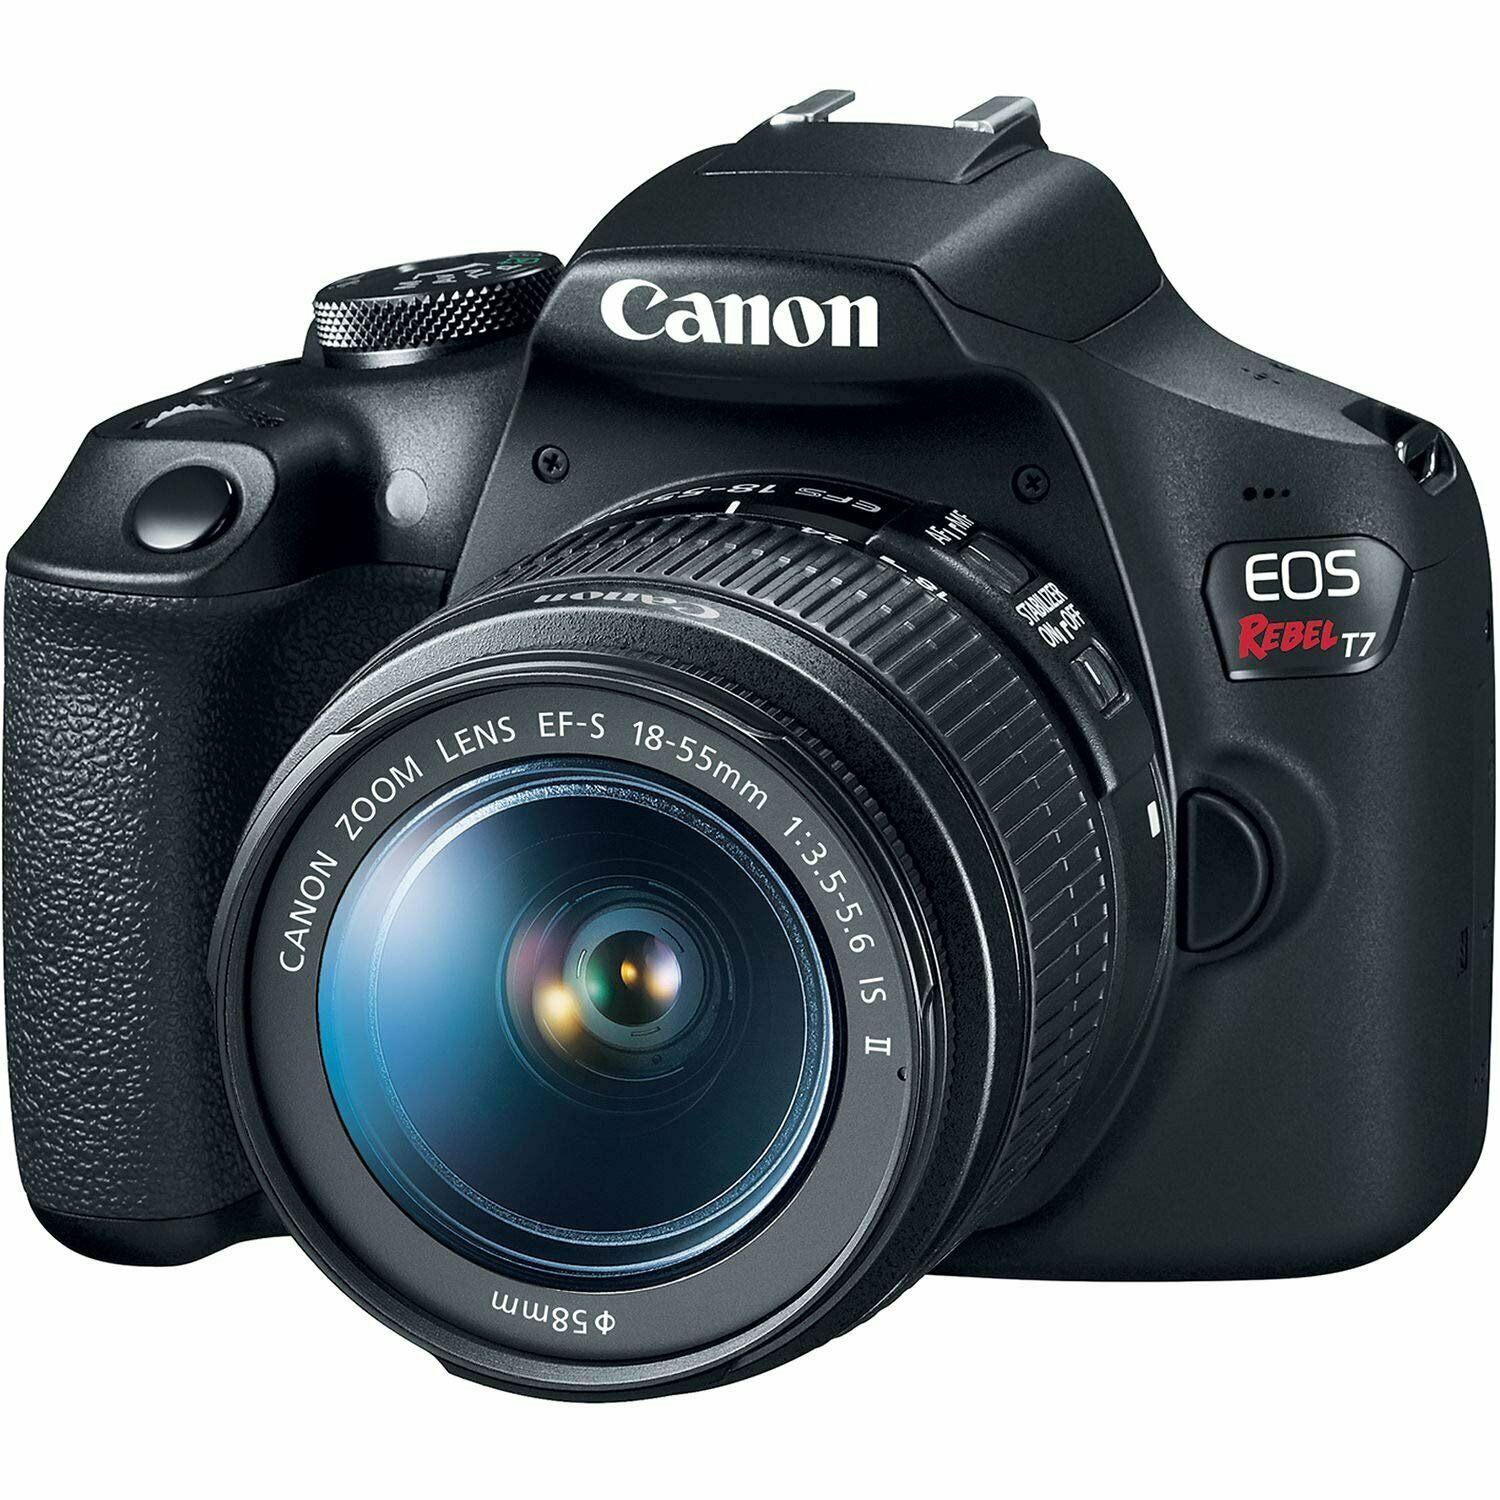 Canon EOS Rebel T7 DSLR Camera with 18-55mm Lens Deluxe Bundle